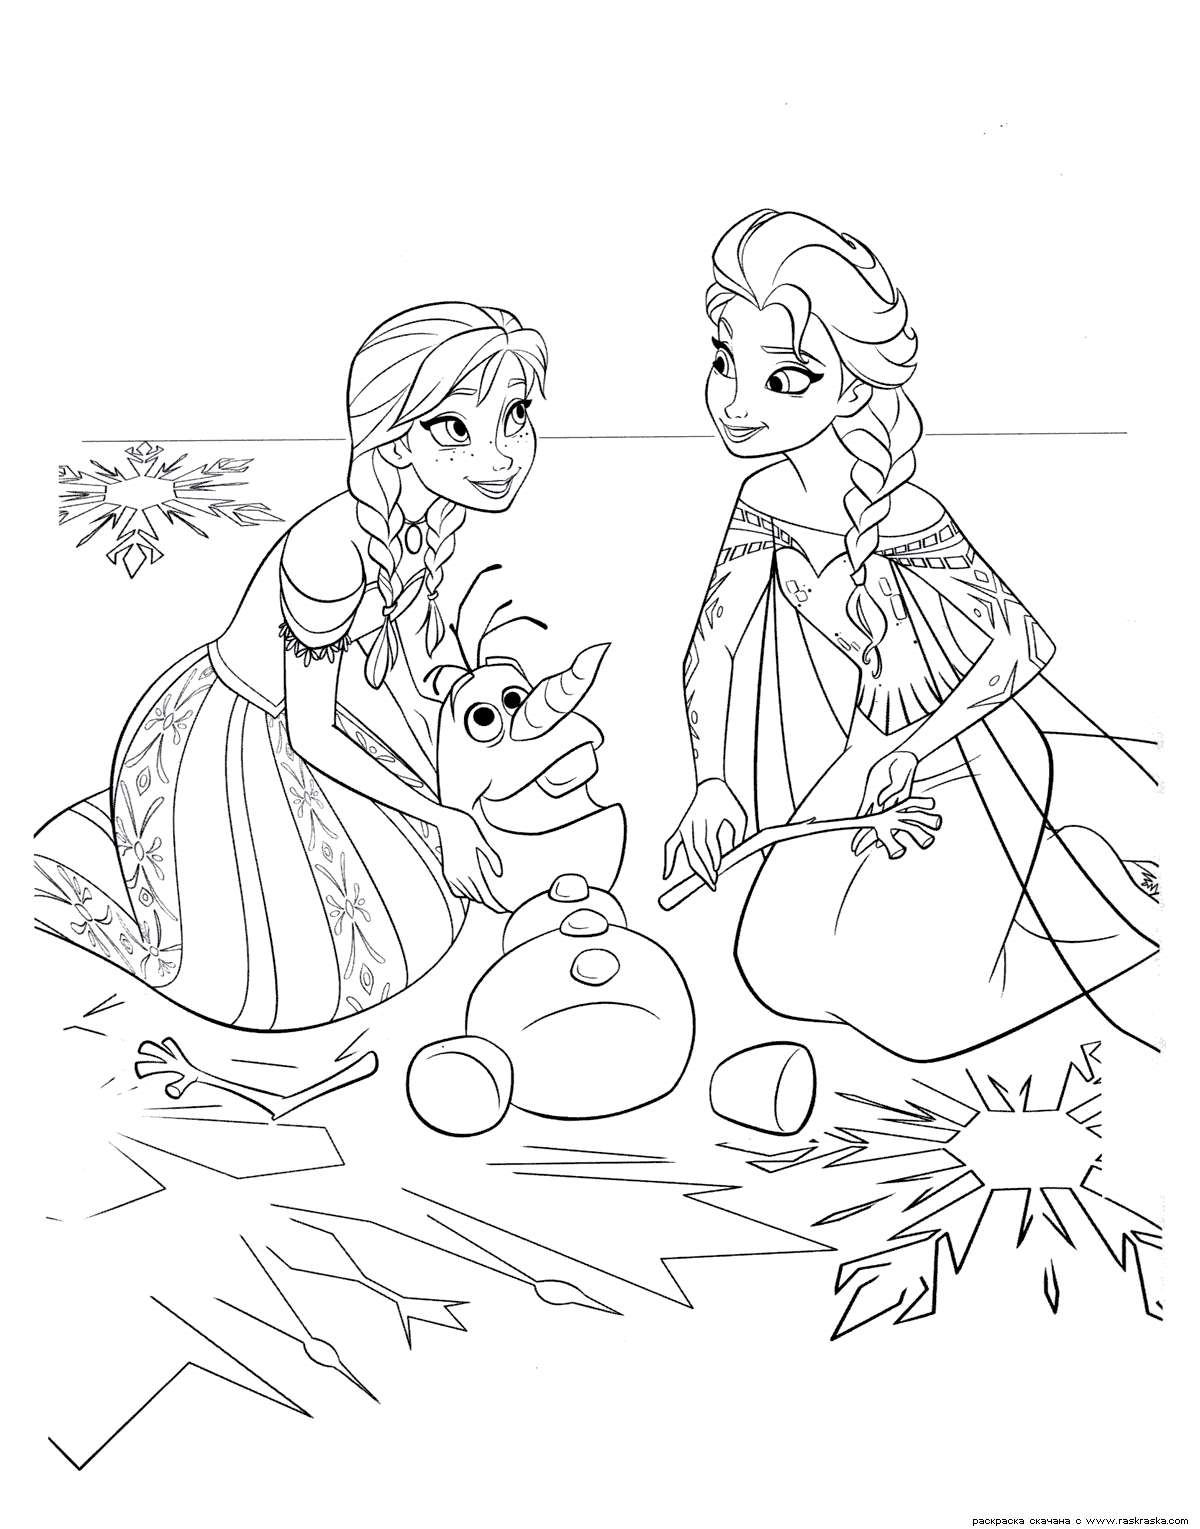 frozen characters coloring pages deviantart more like chibi anna and elsa from frozen coloring characters pages frozen 